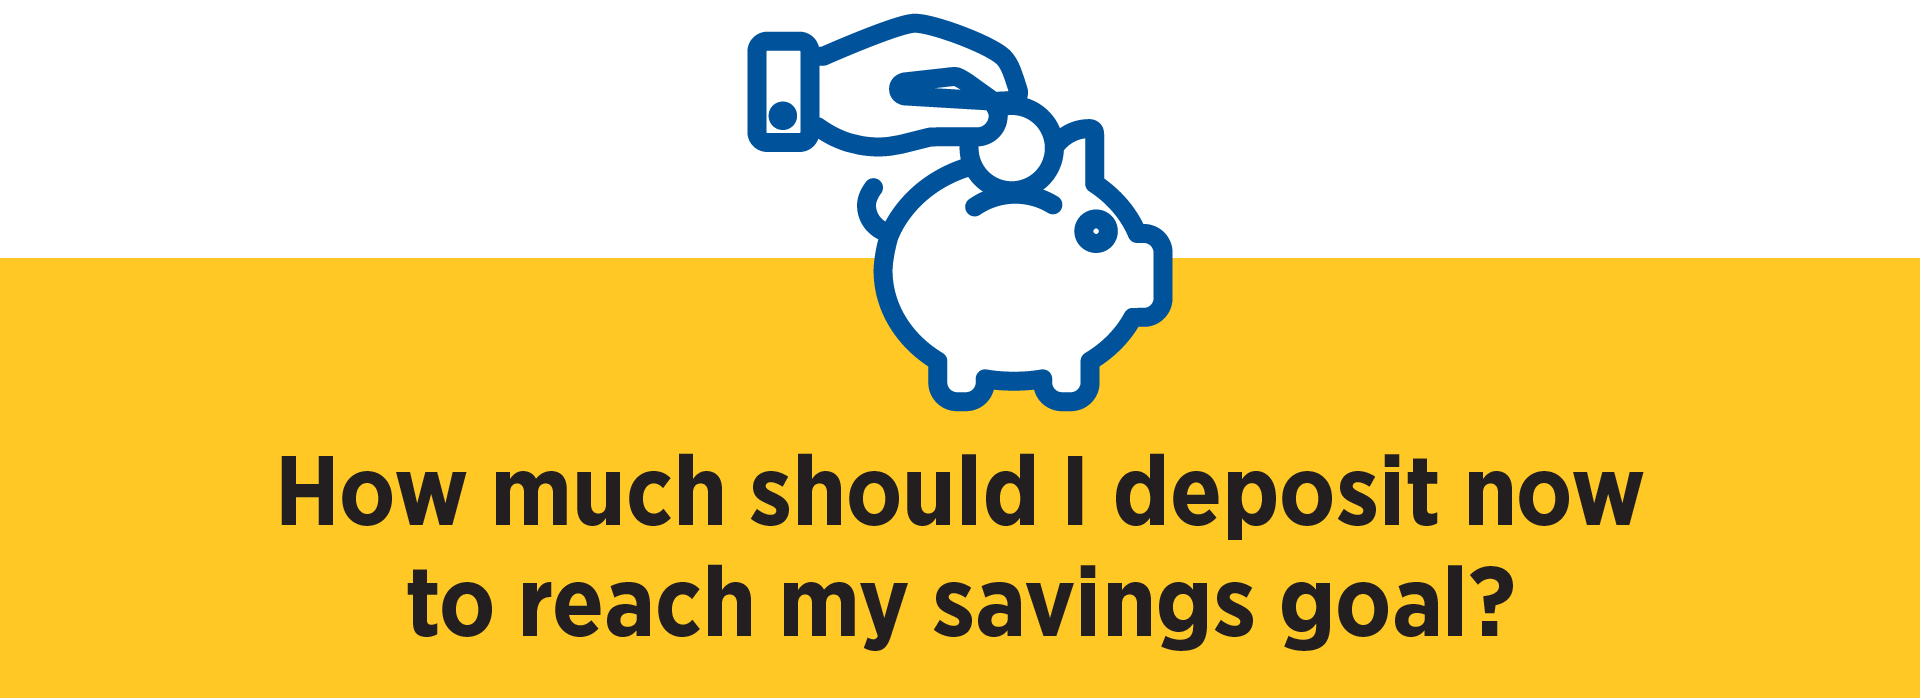 Savings Calculator Icon How much should I deposit now to reach my goal